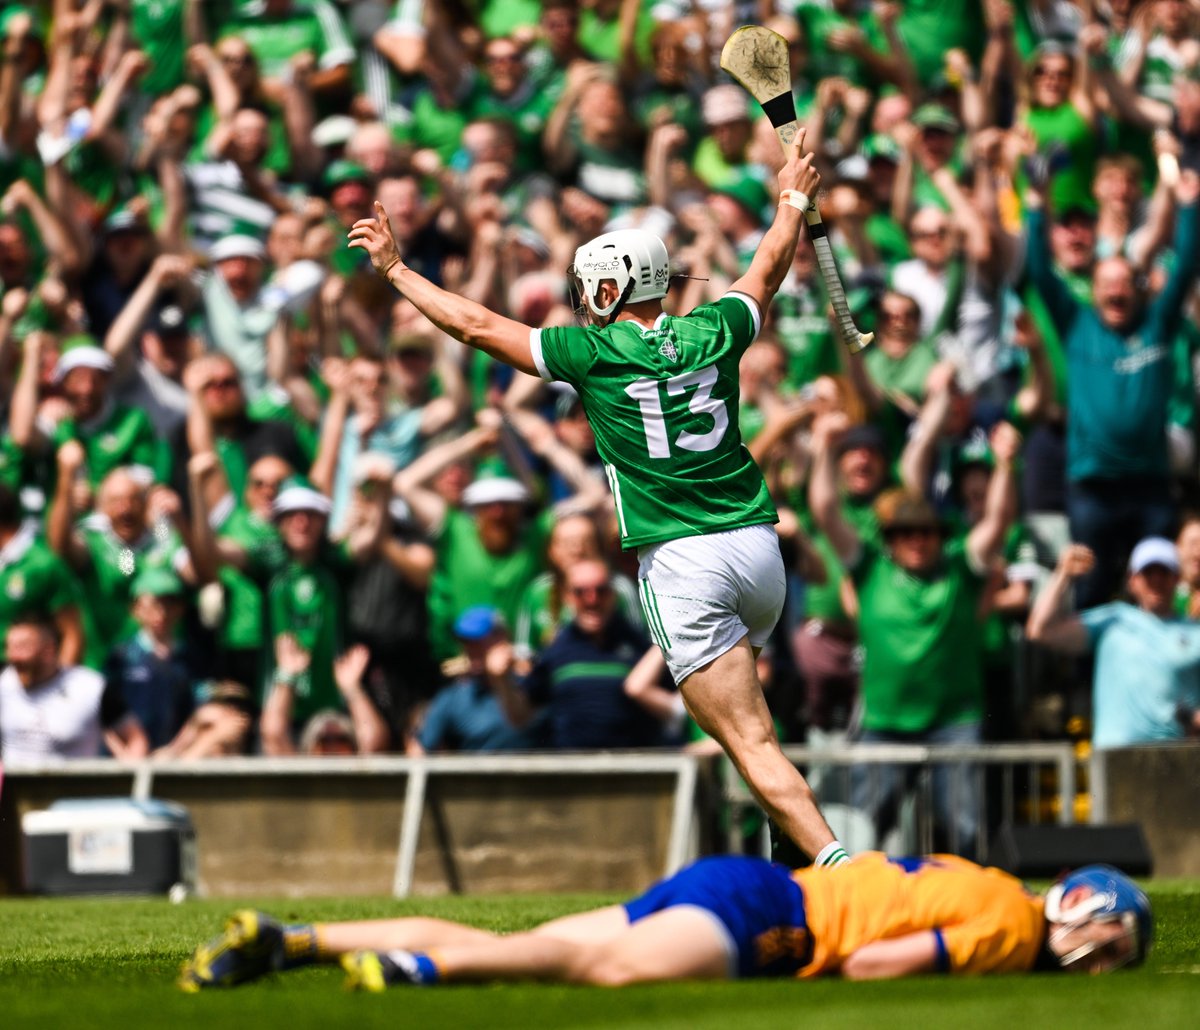 #BREAKING: @LimerickCLG have completed an historic five-in-a-row after defeating Clare in the Munster SHC final at @LITgaelicground - full coverage and reaction to come at limericklive.ie